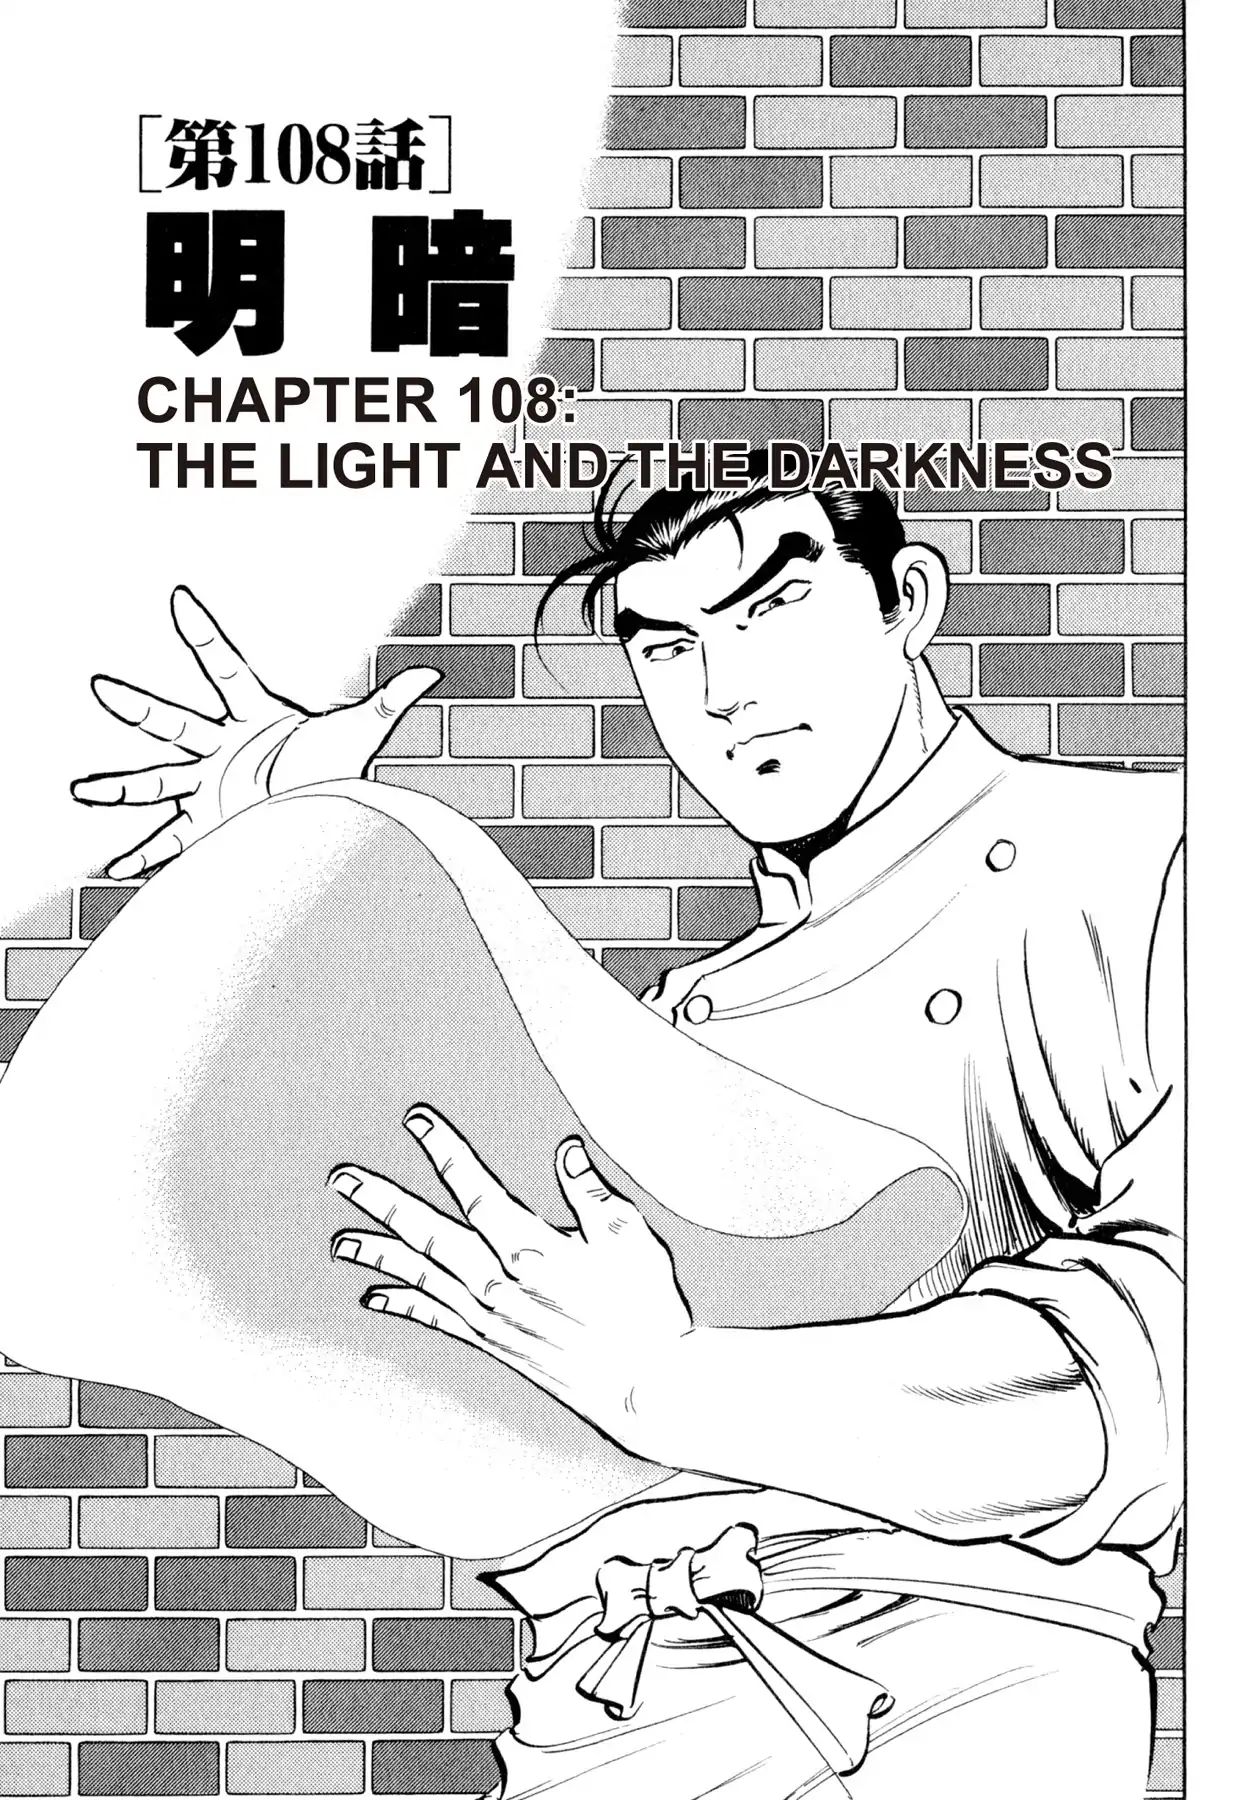 Shoku King VOL.13 CHAPTER 108: THE LIGHT AND THE DARKNESS